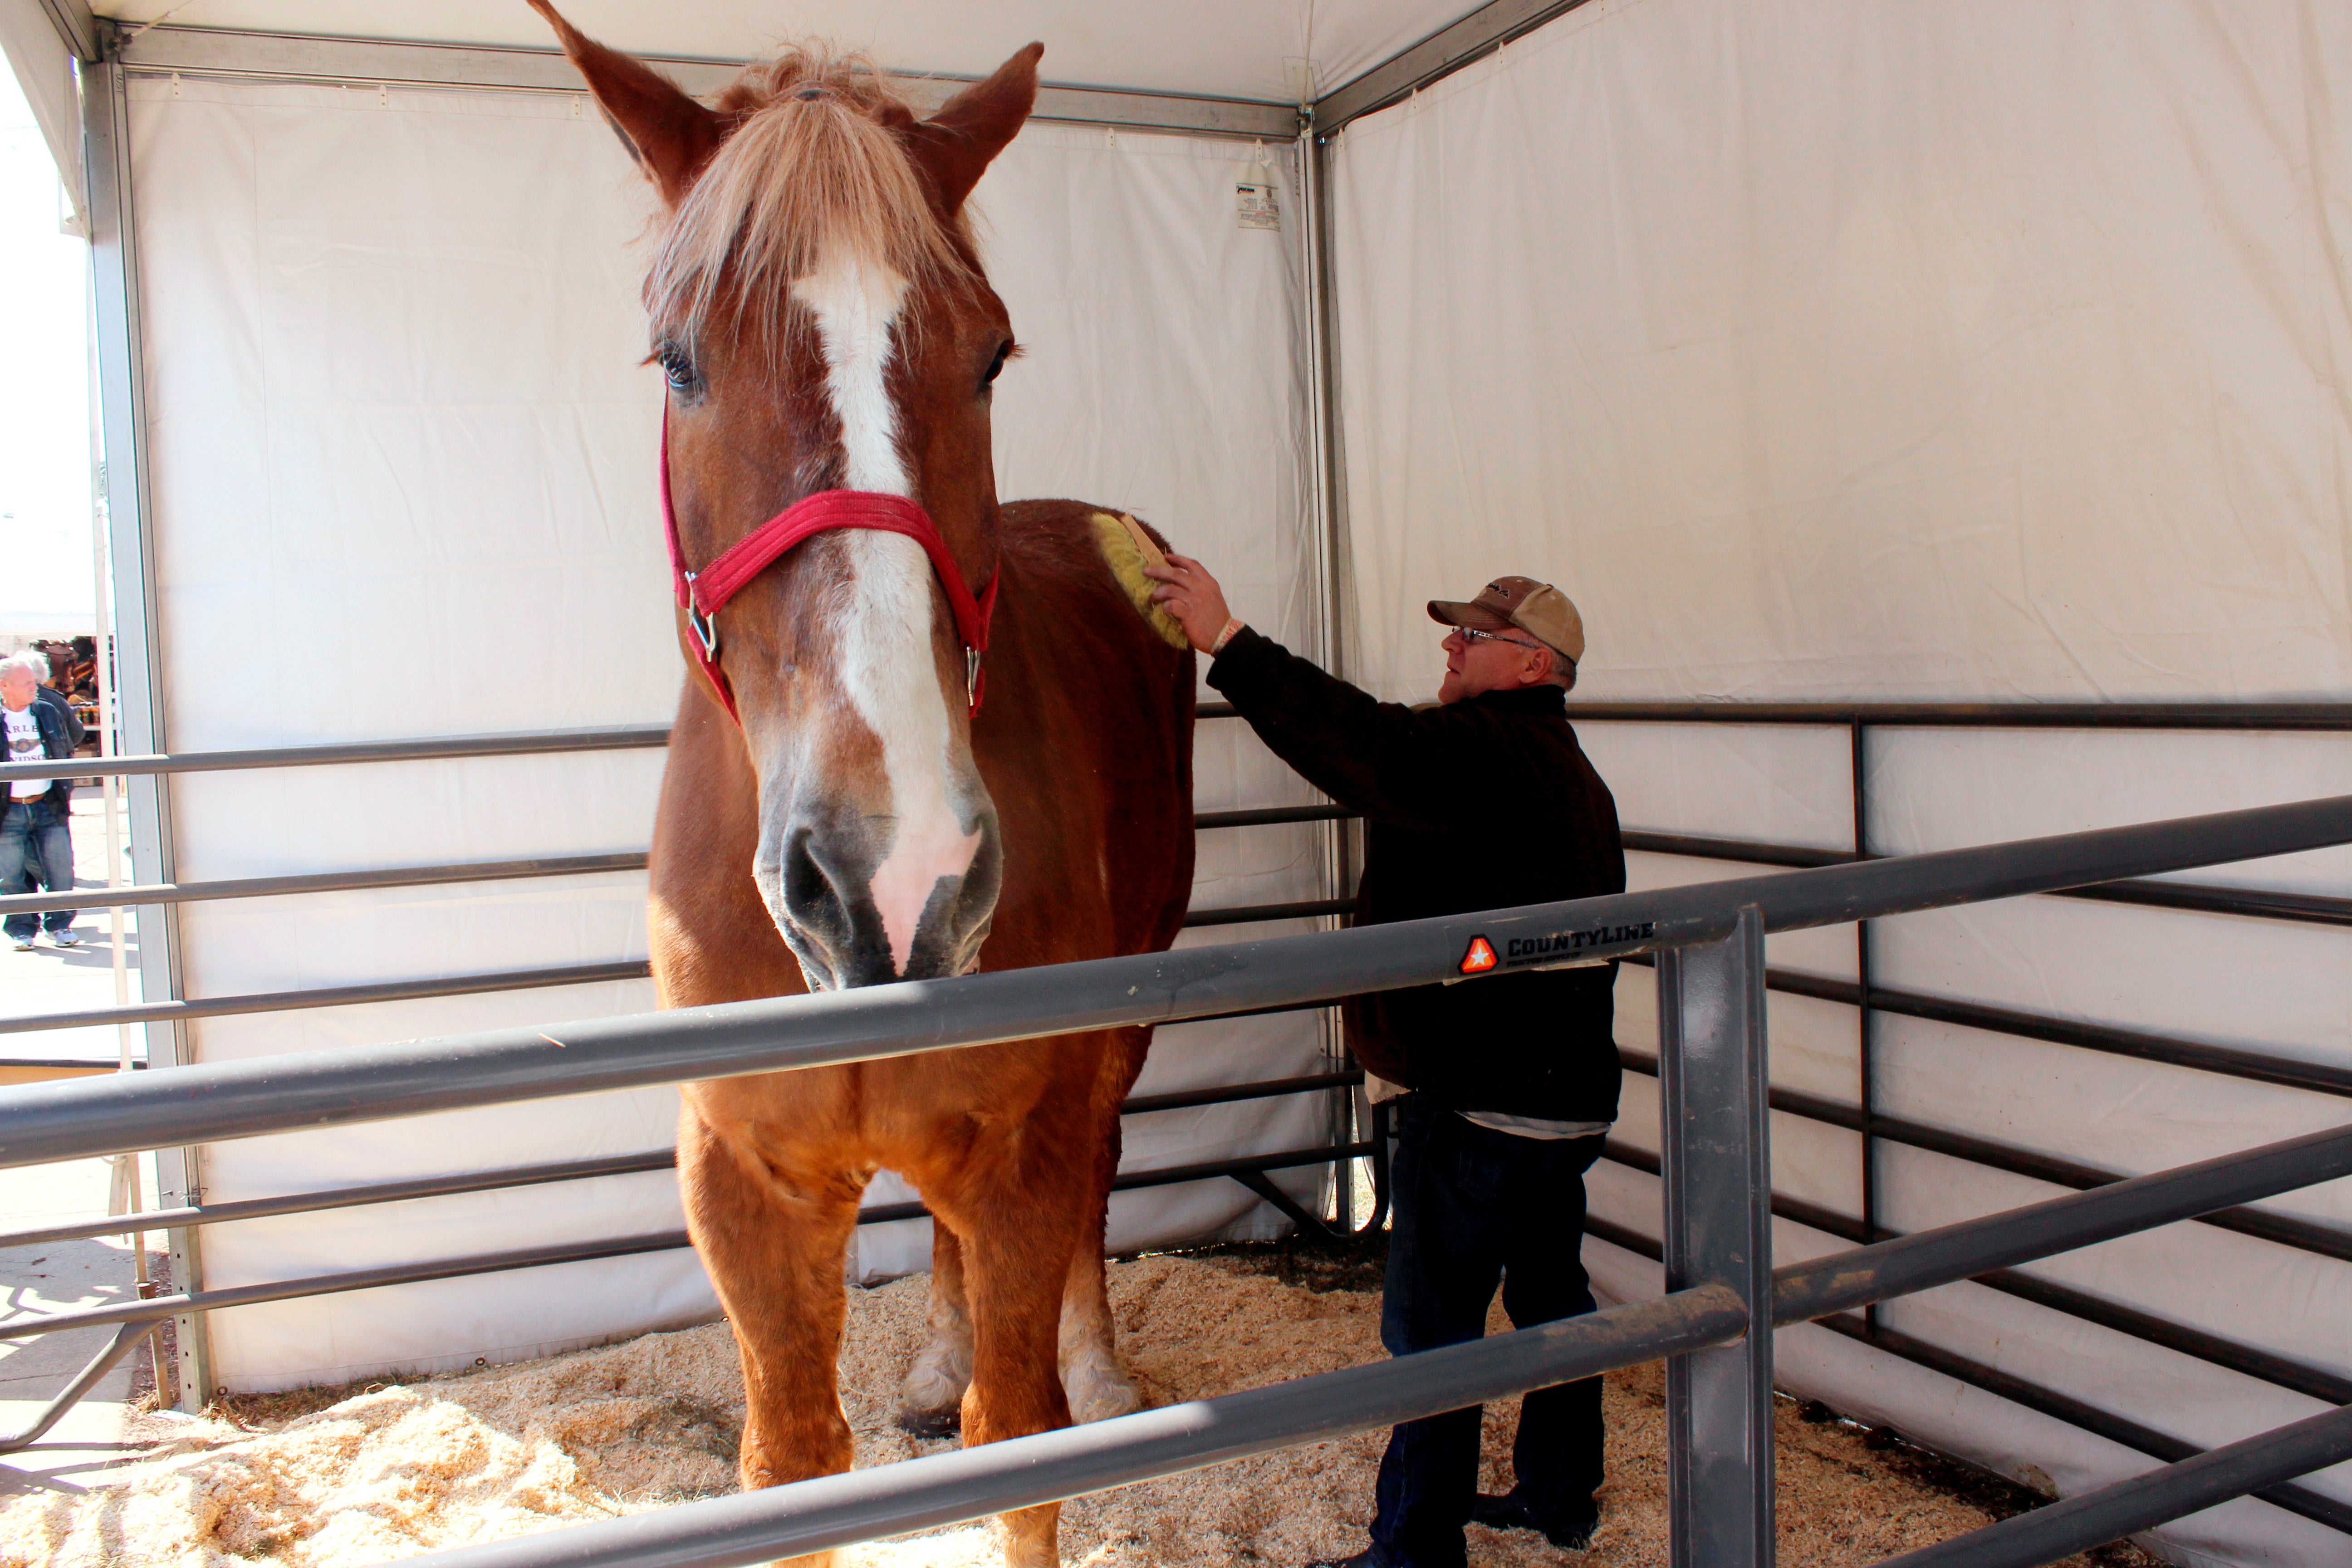 Big Jake earned the Guinness Book of World Records for world’s tallest horse in 2010